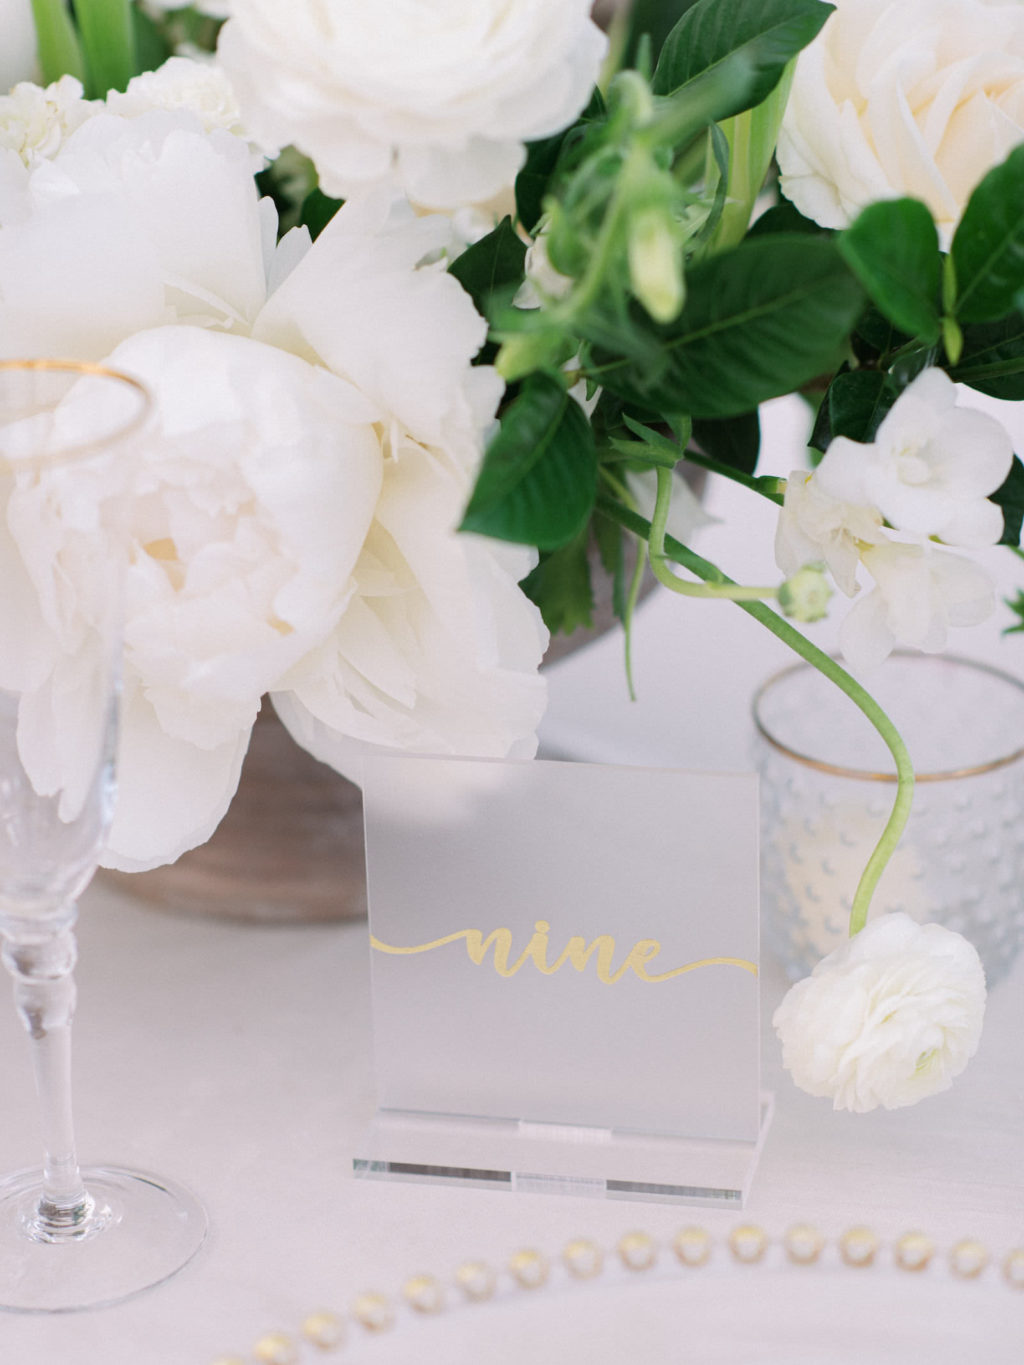 Luxurious Elegant Florida Classic Wedding Reception Decor, Frosted Acrylic and Gold Table Number, White Roses and Greenery Floral Centerpiece